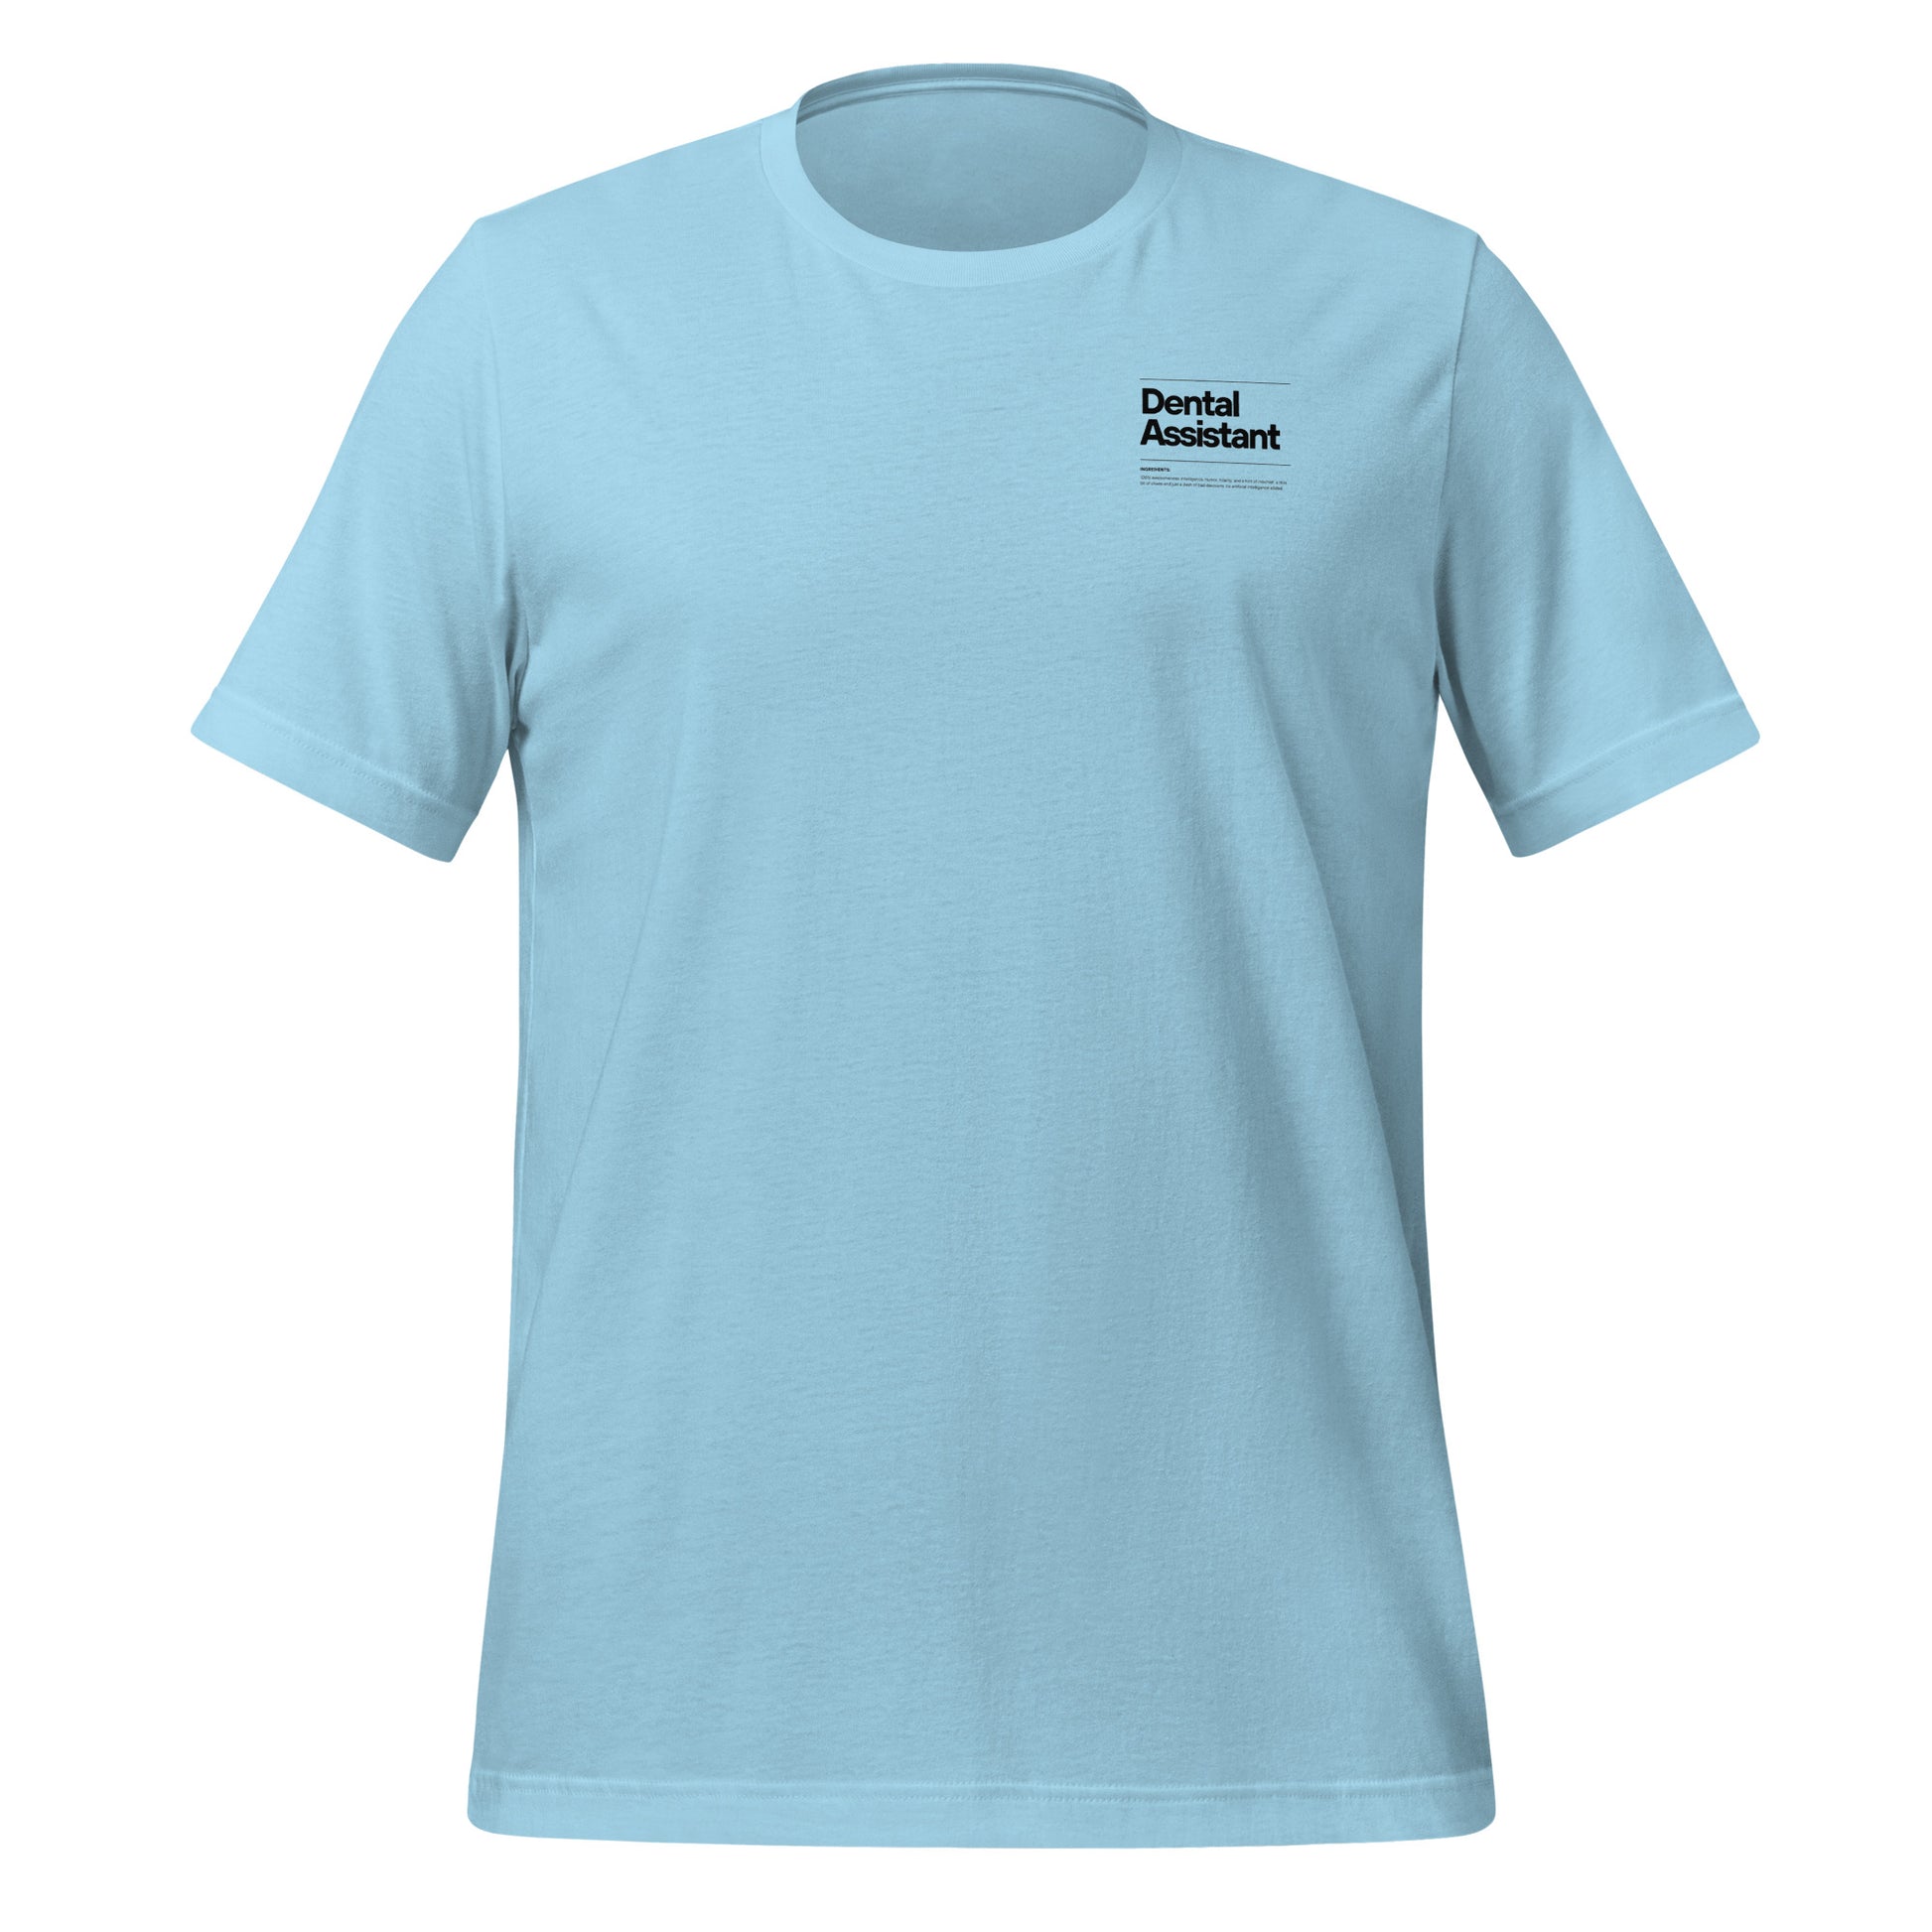 Ocean blue dental assistant shirt featuring a creative label design with icons and text, perfect for dental assistants who want to express their identity and passion for their job - dental shirts front view.